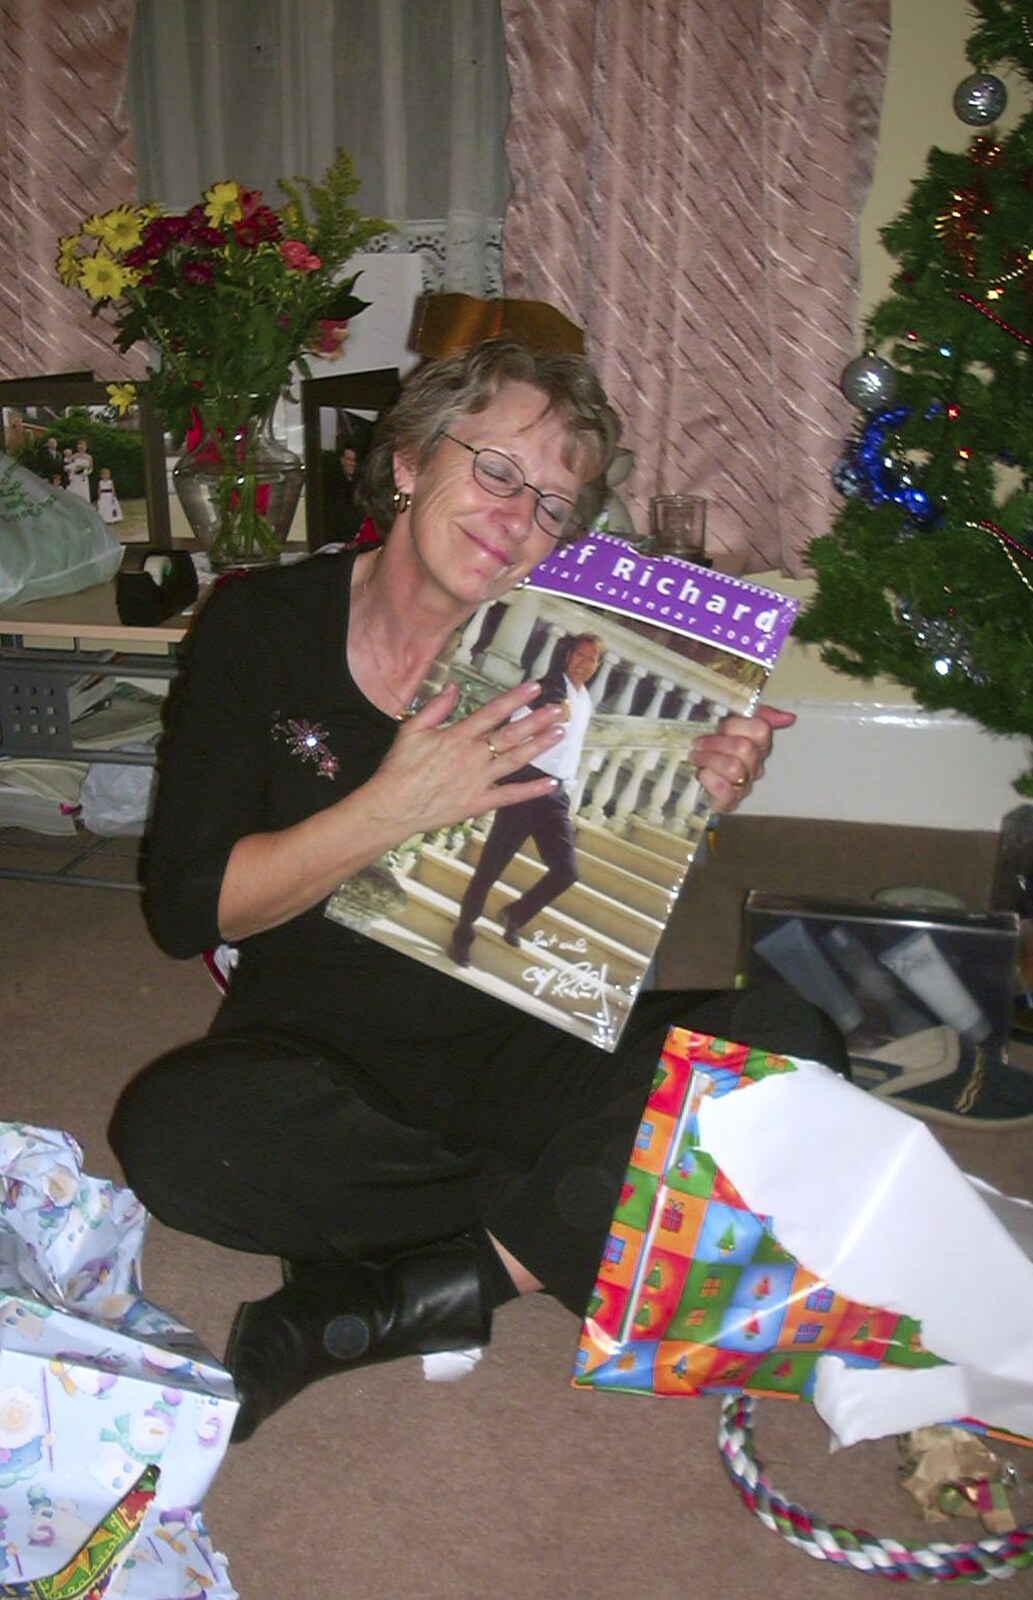 Someone loves their Cliff Richard calendar from Christmas at The Cottage, Thorpe St. Andrew, Norwich - 25th December 2003